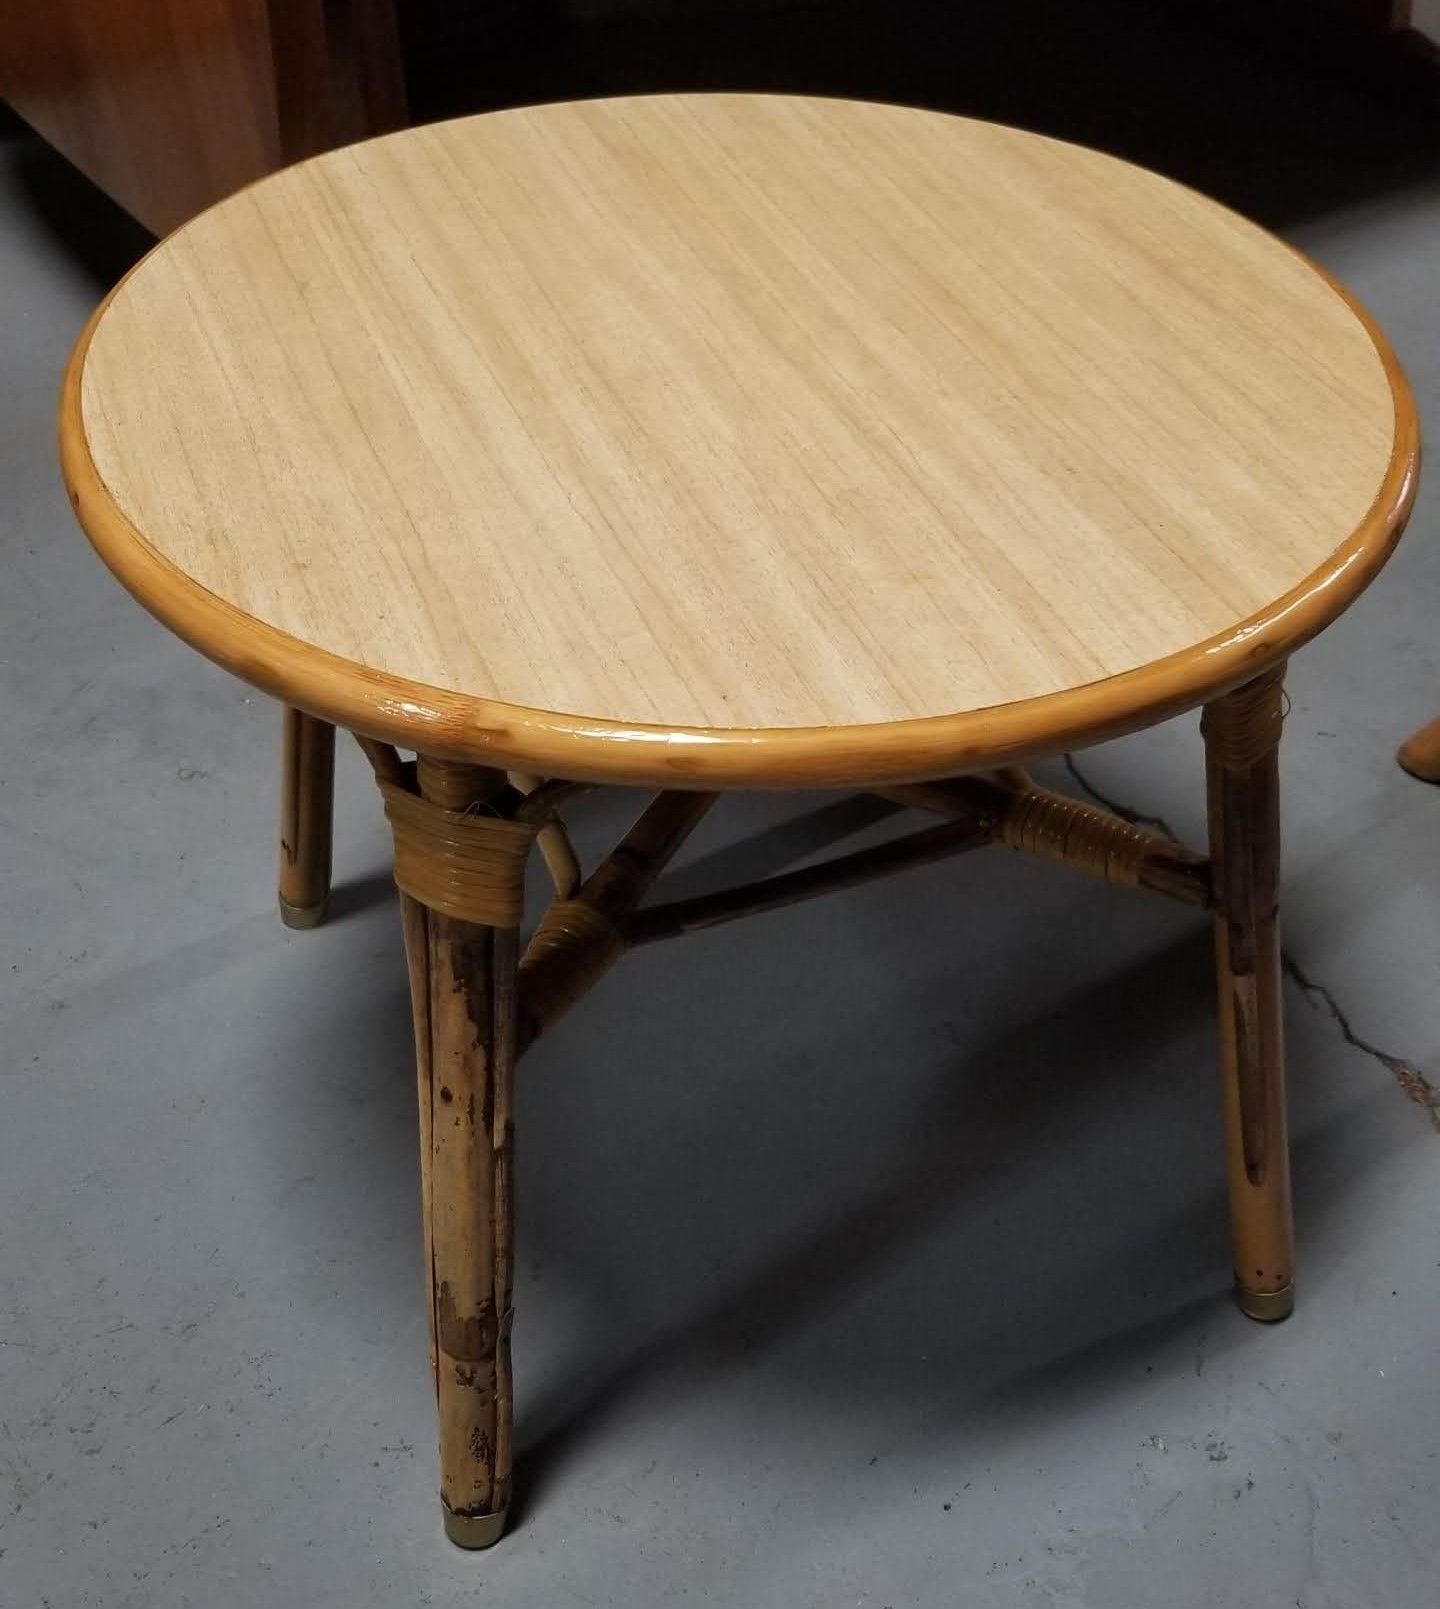 Restored Rattan petite round side table with reed rattan square base and leg piping and a light sand color Formica top. Perfect coffee table size for a small living space, or as a side table to your seating area.

Dimensions:
Height: 17